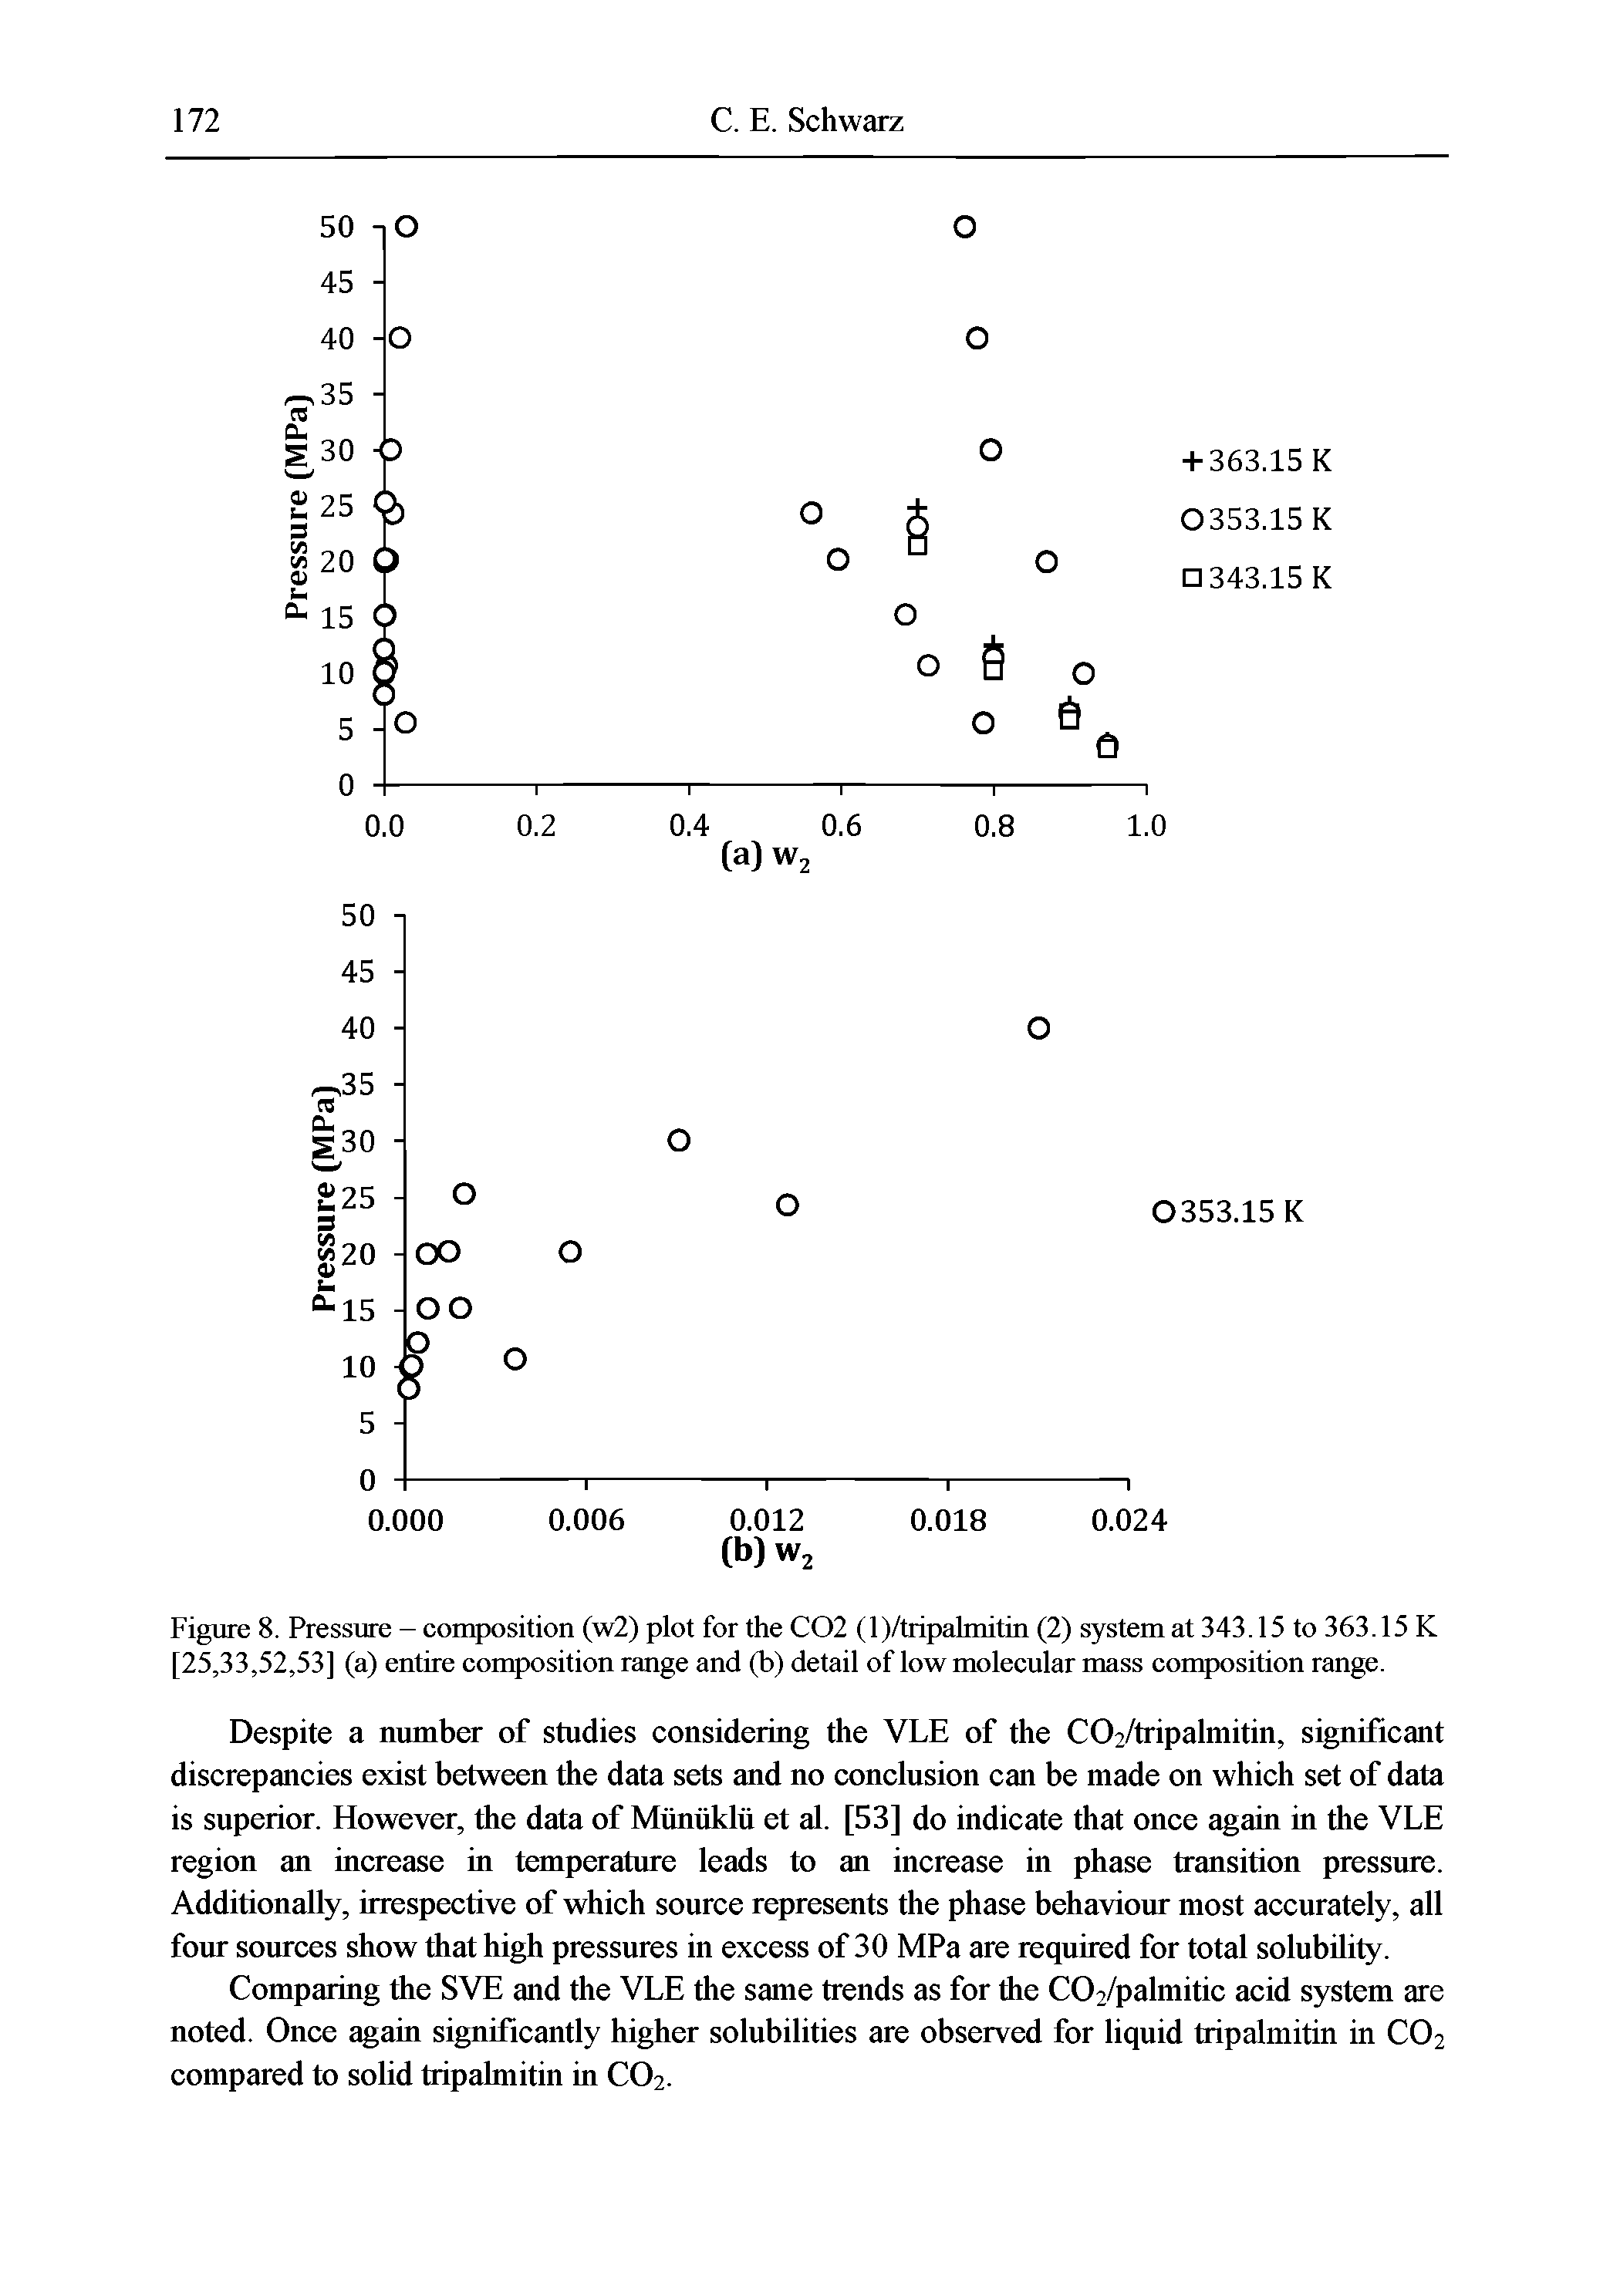 Figure 8. Pressure - composition (w2) plot for the C02 (1 )/tripalmitin (2) system at 343.15 to 363.15 K [25,33,52,53] (a) entire composition range and (b) detail of low molecular mass composition range.